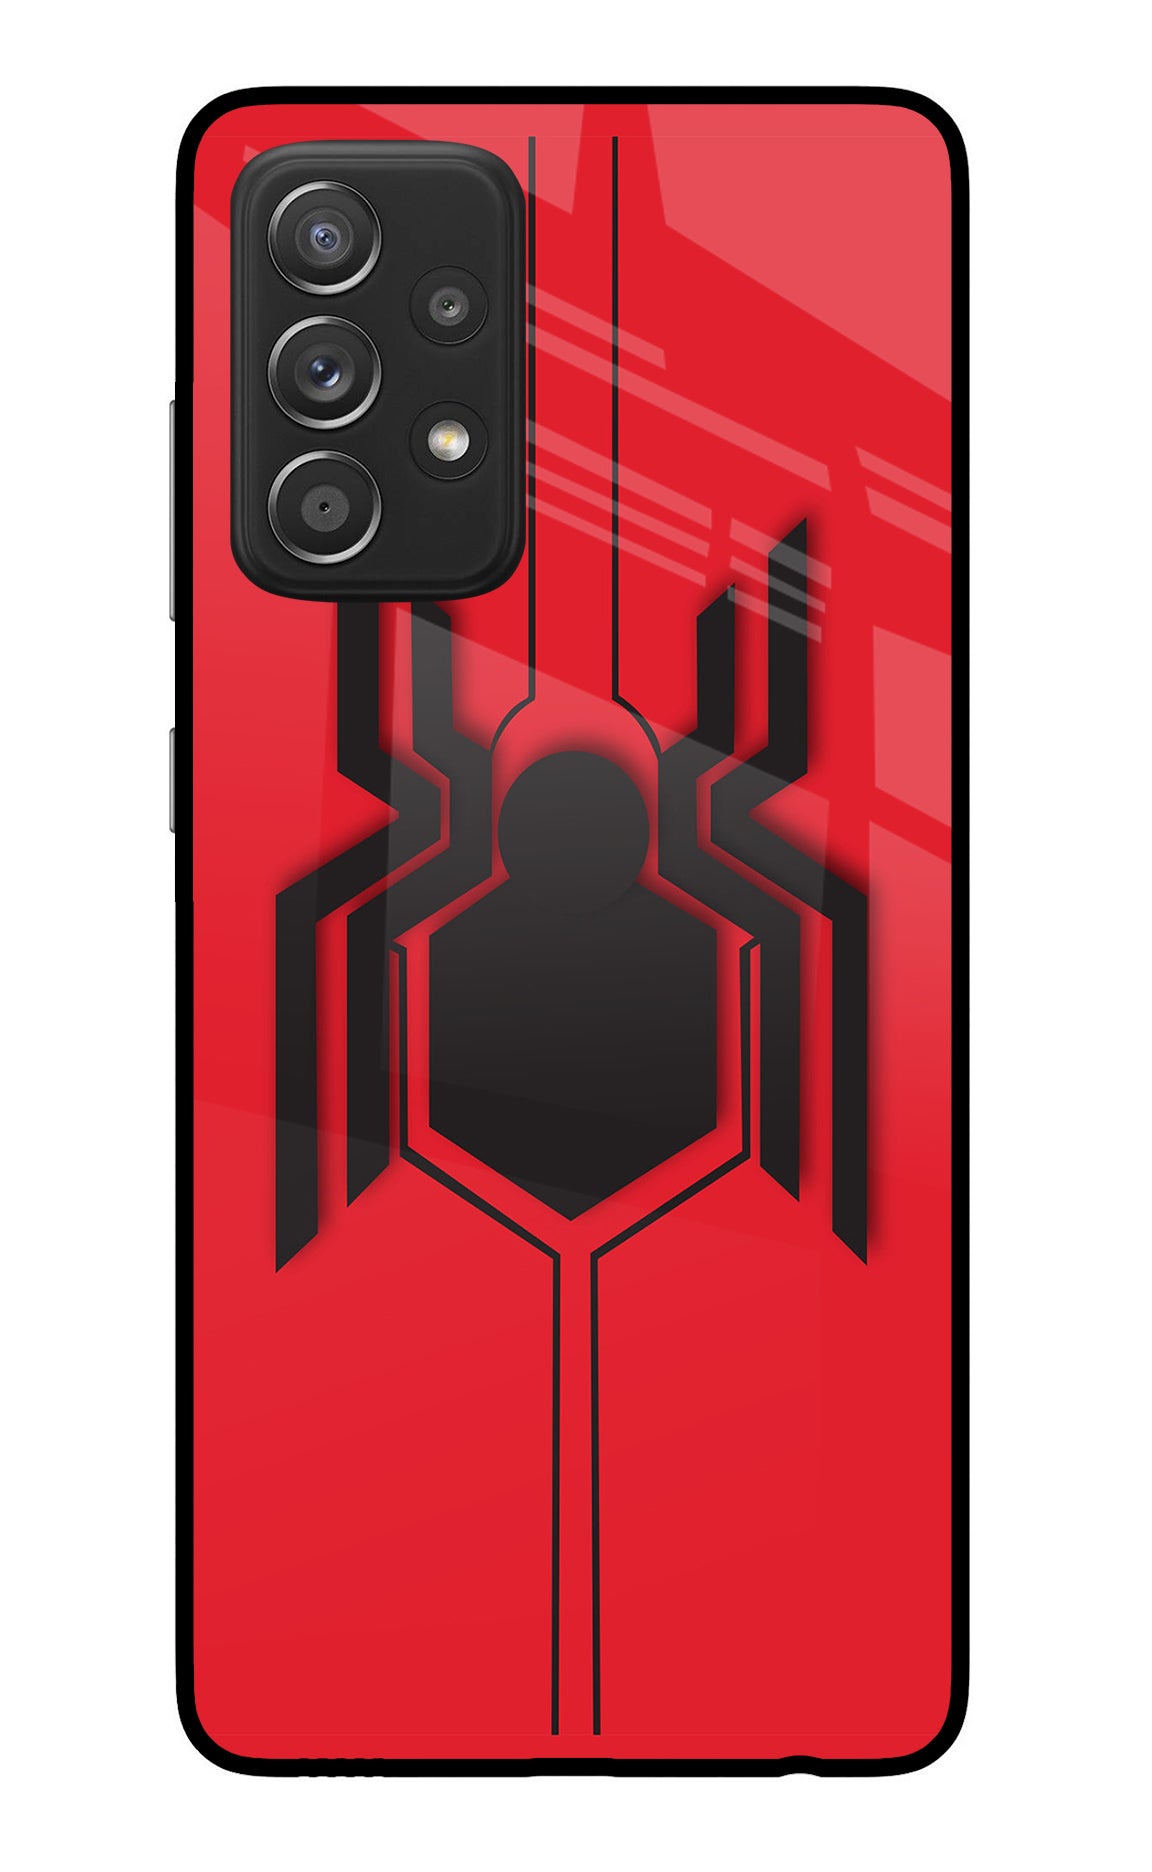 Spider Samsung A52/A52s 5G Back Cover